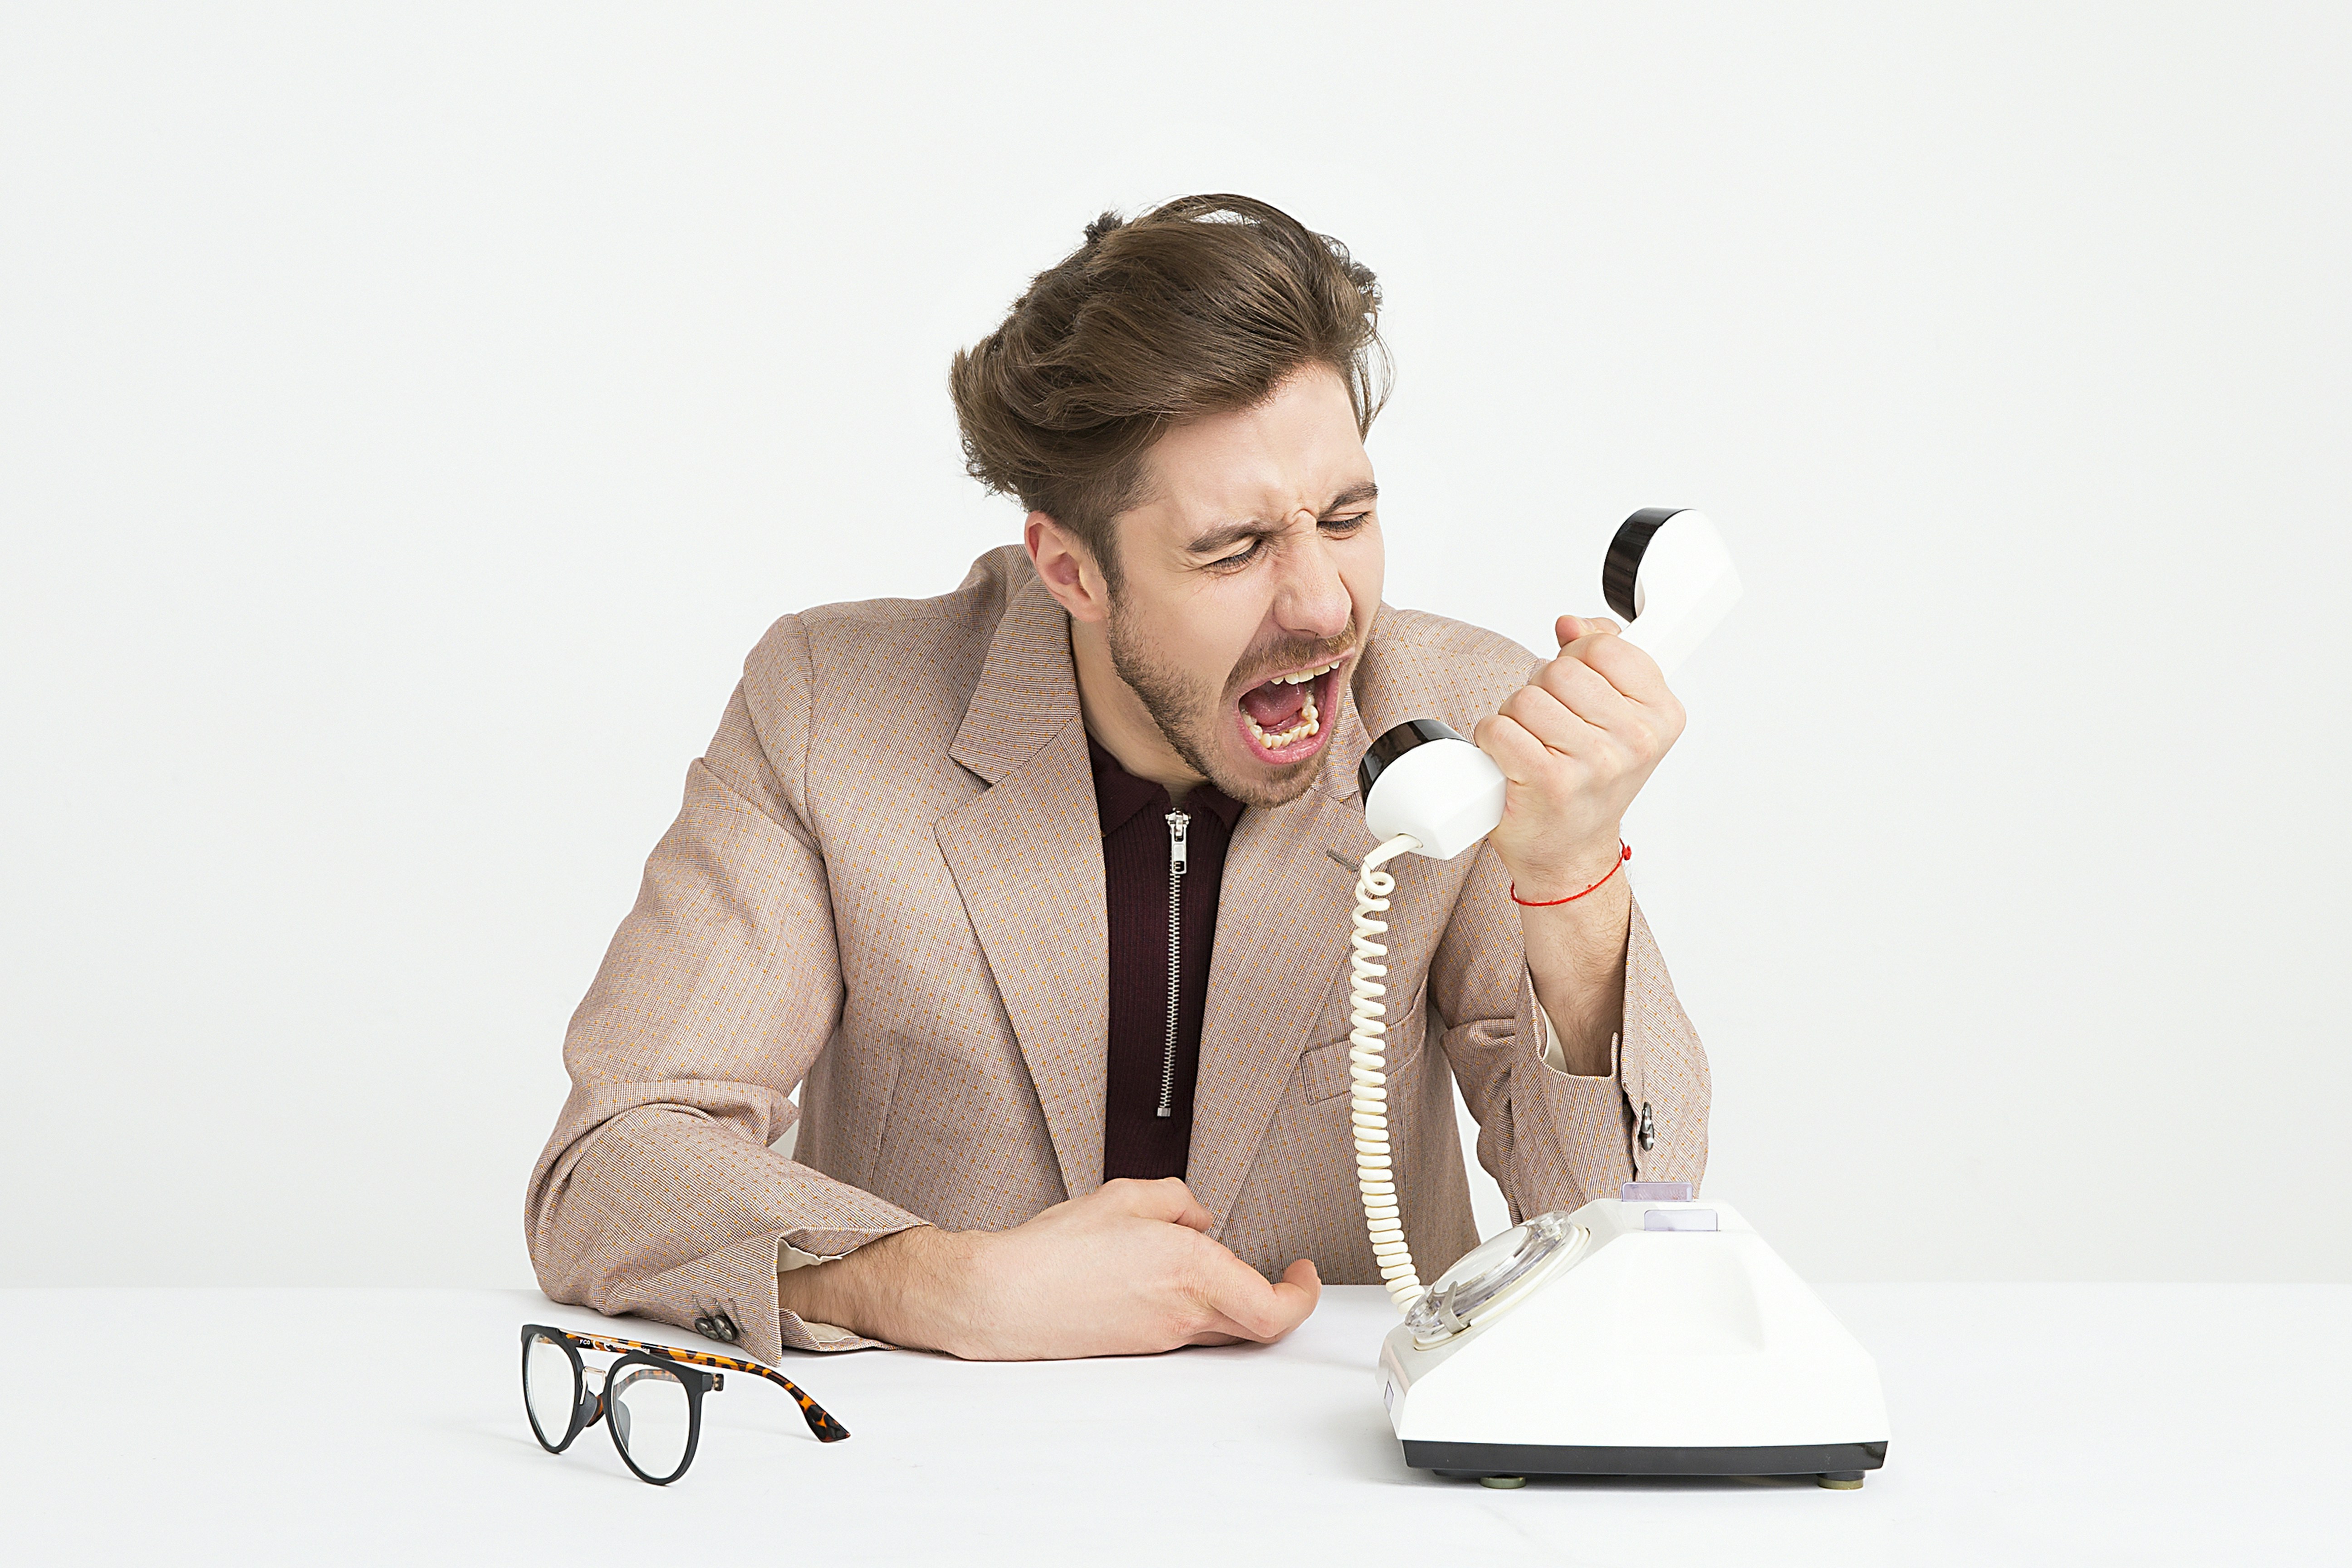 A person screaming into the phone.